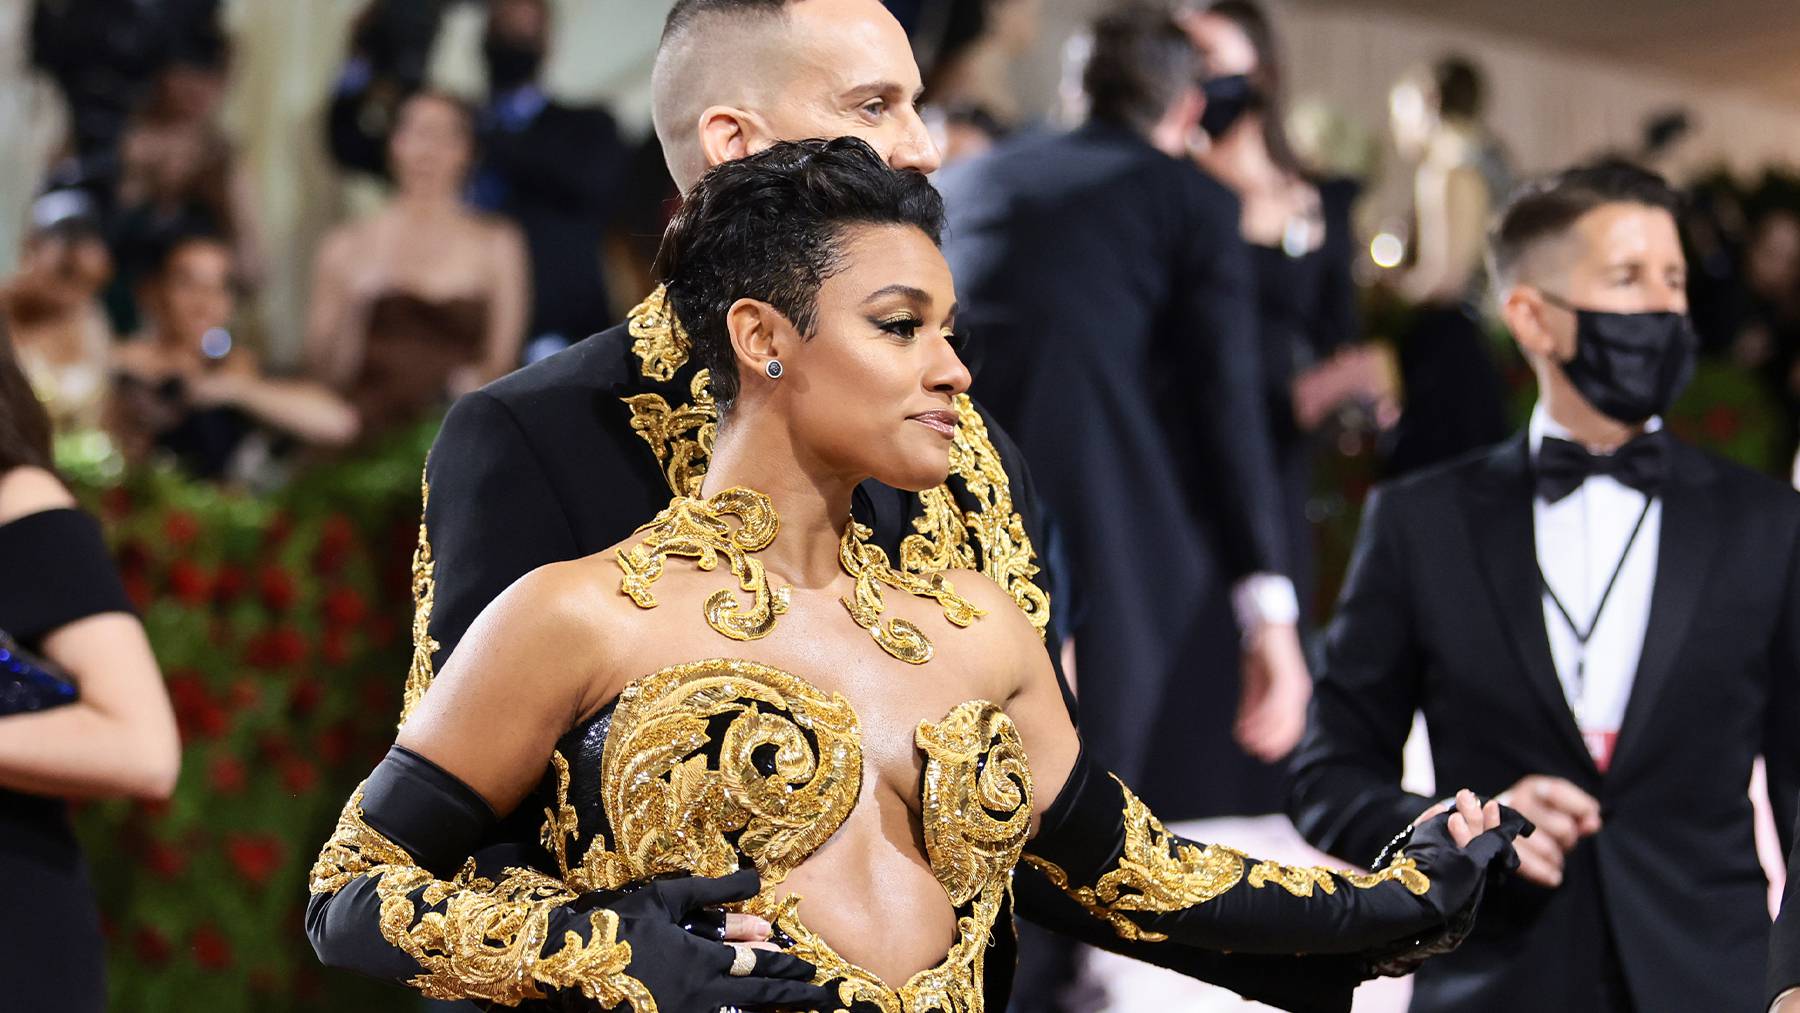 Ariana DeBose, who was styled by Zadrian Smith and Sarah Edmiston, with designer Jeremy Scott, at the 2022 Met Gala.